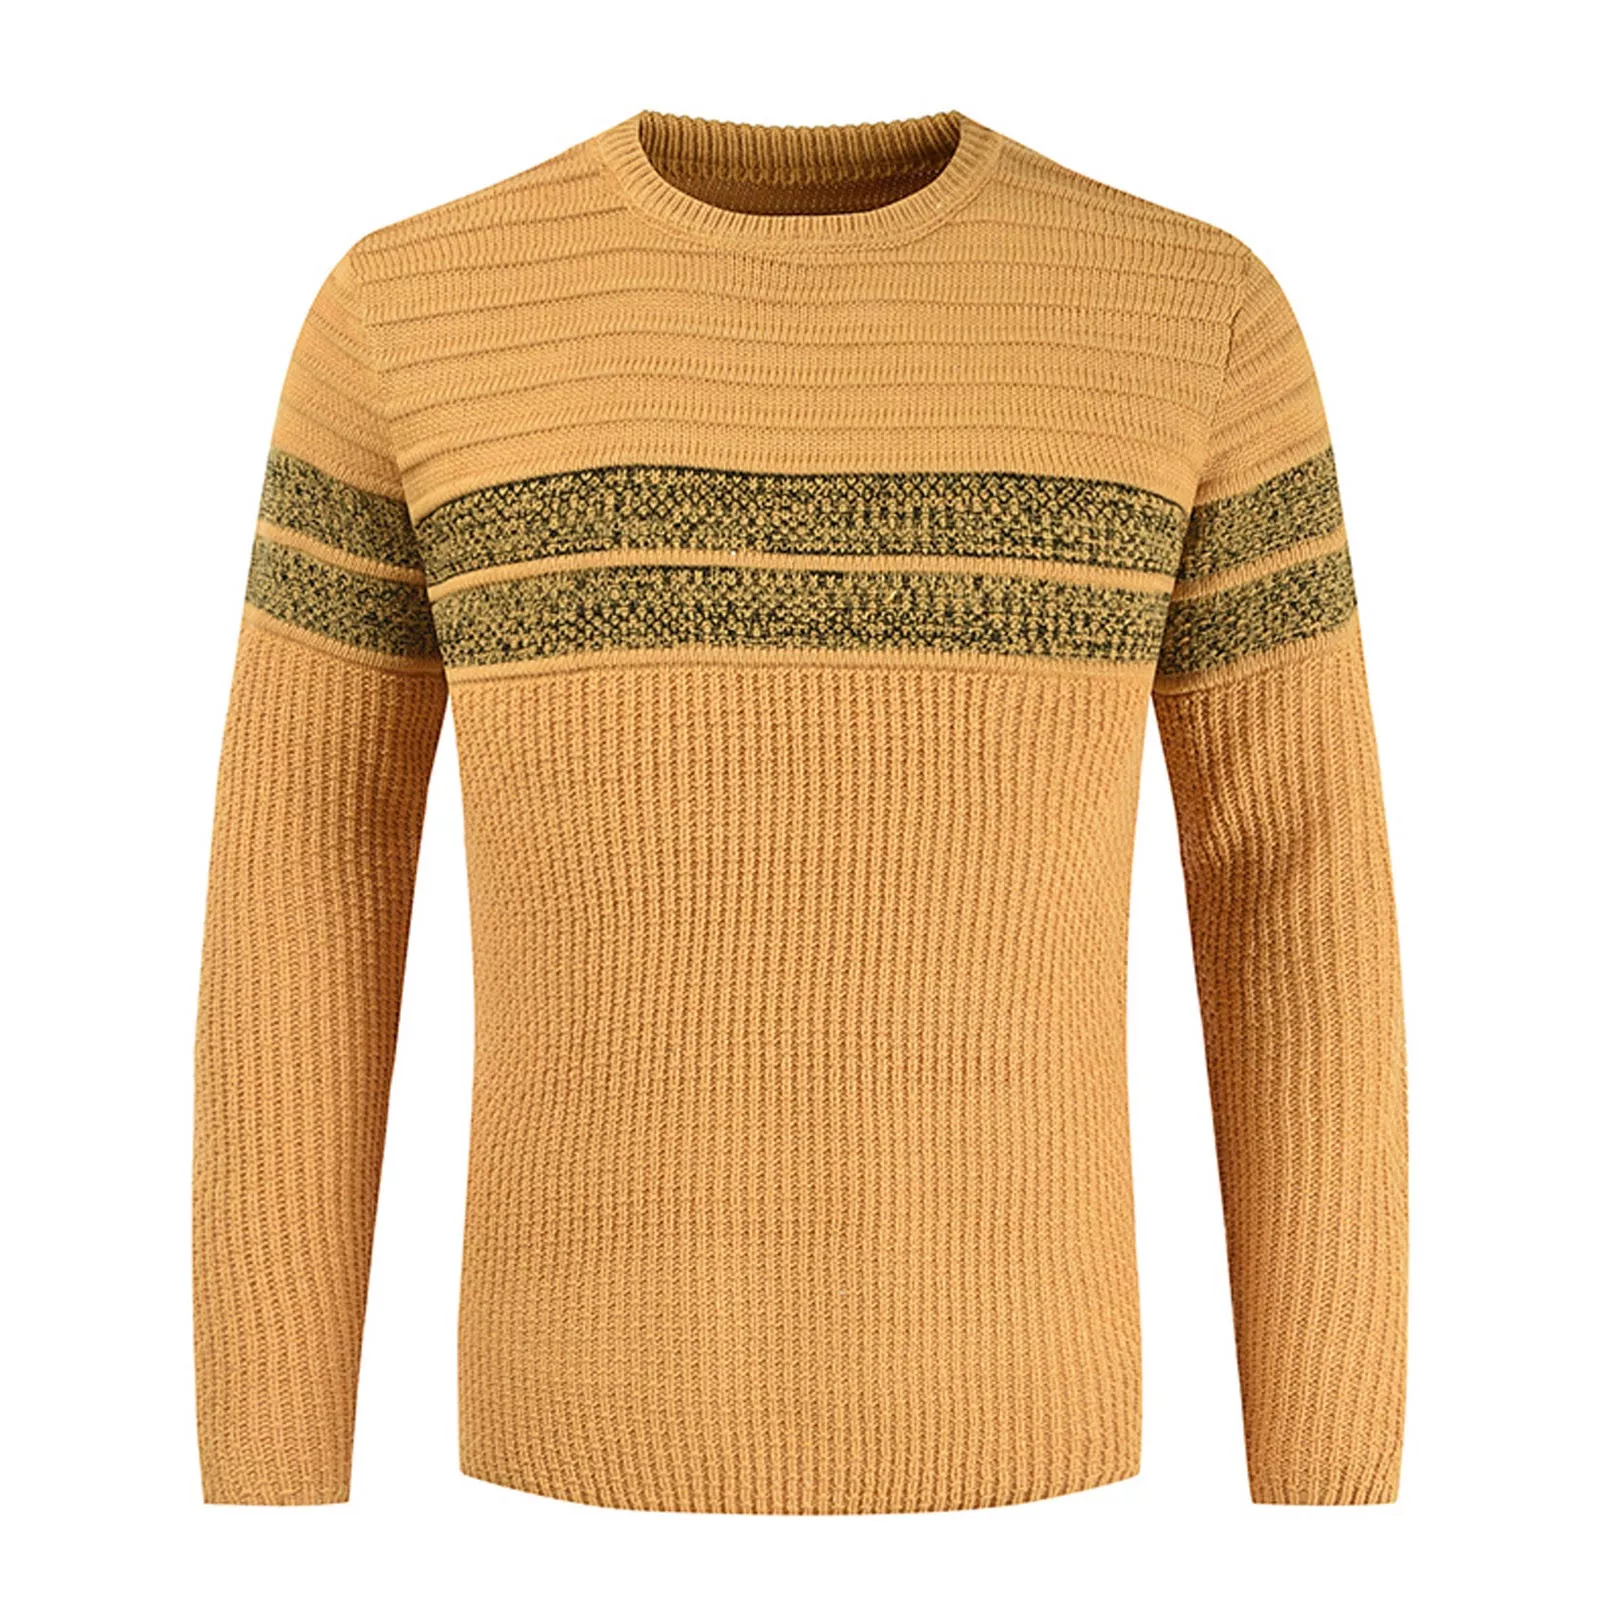 NEW IN Men&s Color Block Warm Sweater Top Round Neck Pullover Sweaters  Fashion Warm All-match Knitted Sweater